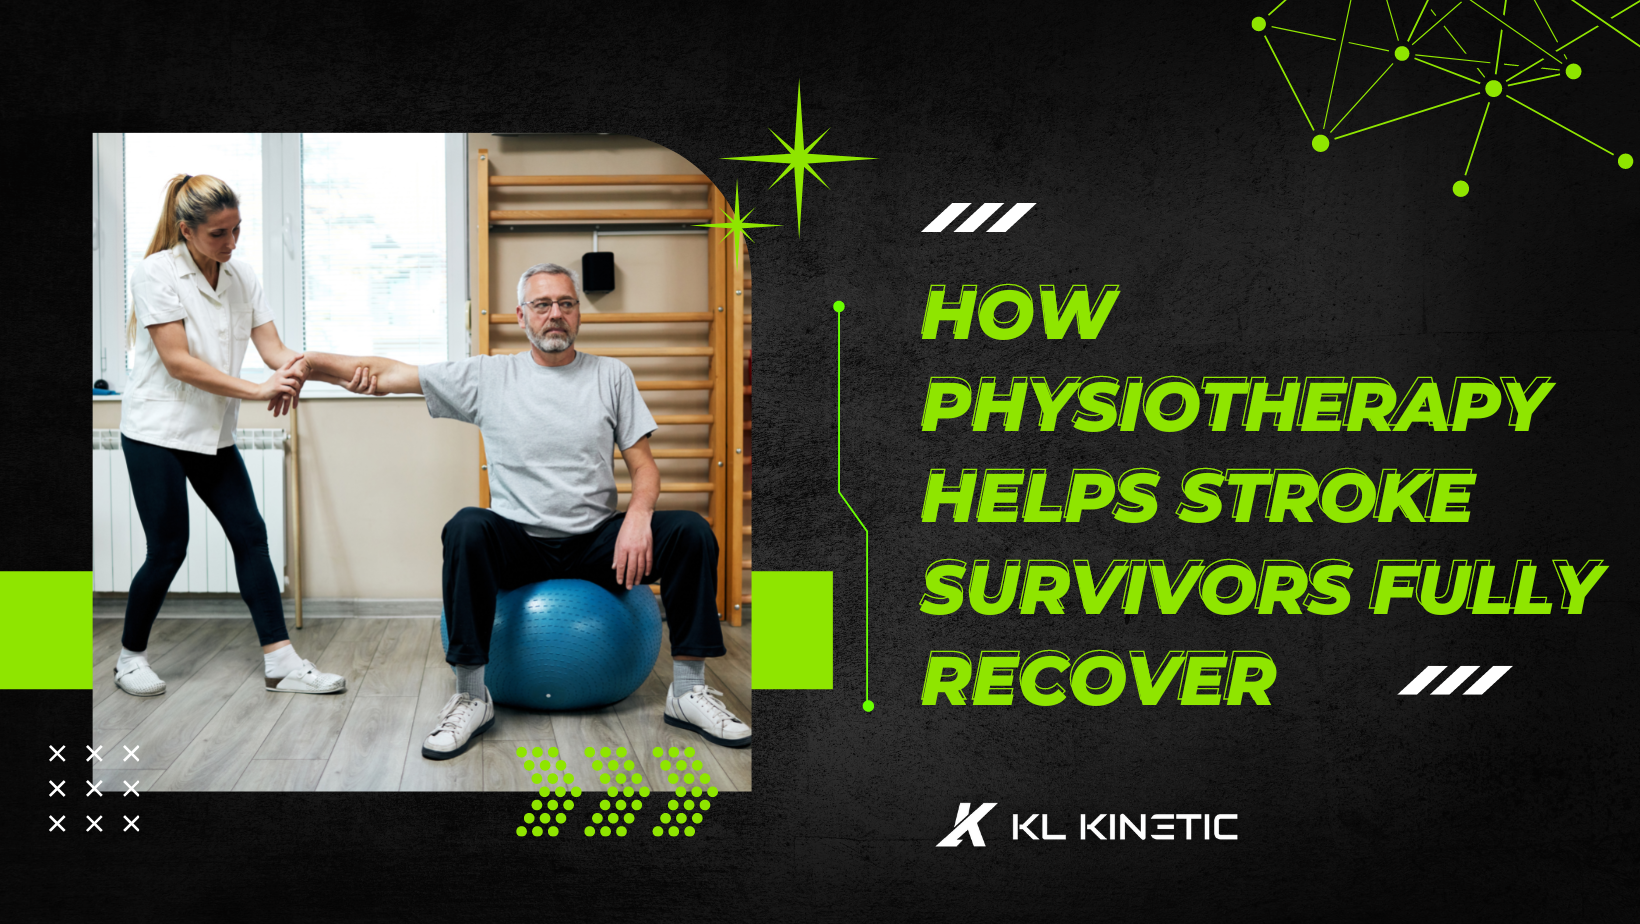 How physiotherapy helps stroke survivors fully recover